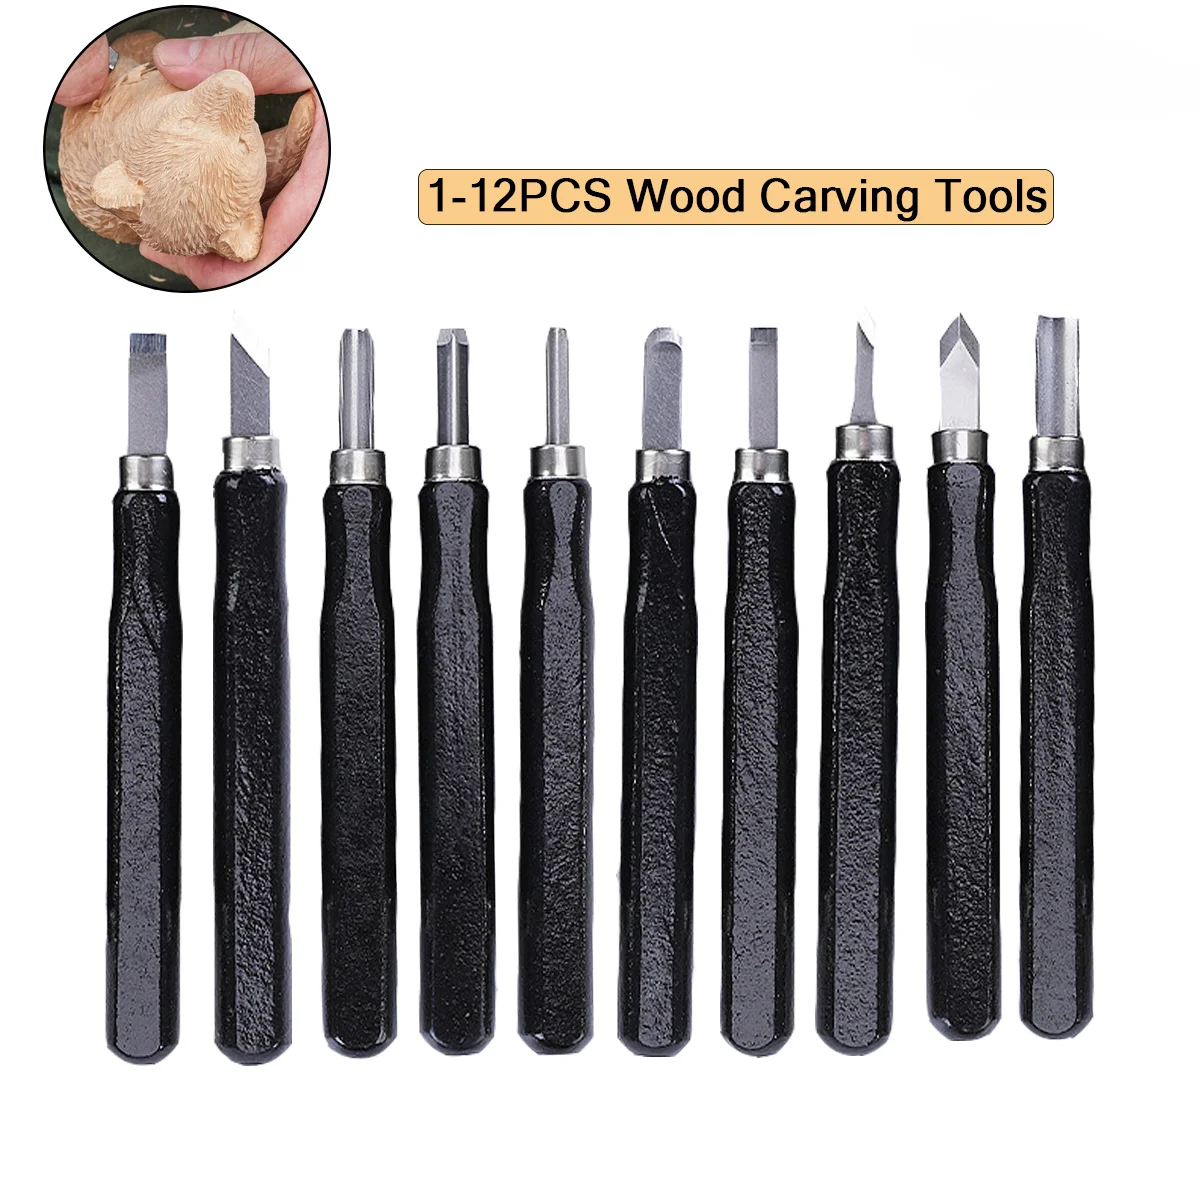 

Wood Carving Tools, 1- 12 PCS SK2 Carbon Steel Sculpting Knife Kit for Beginners & Professions